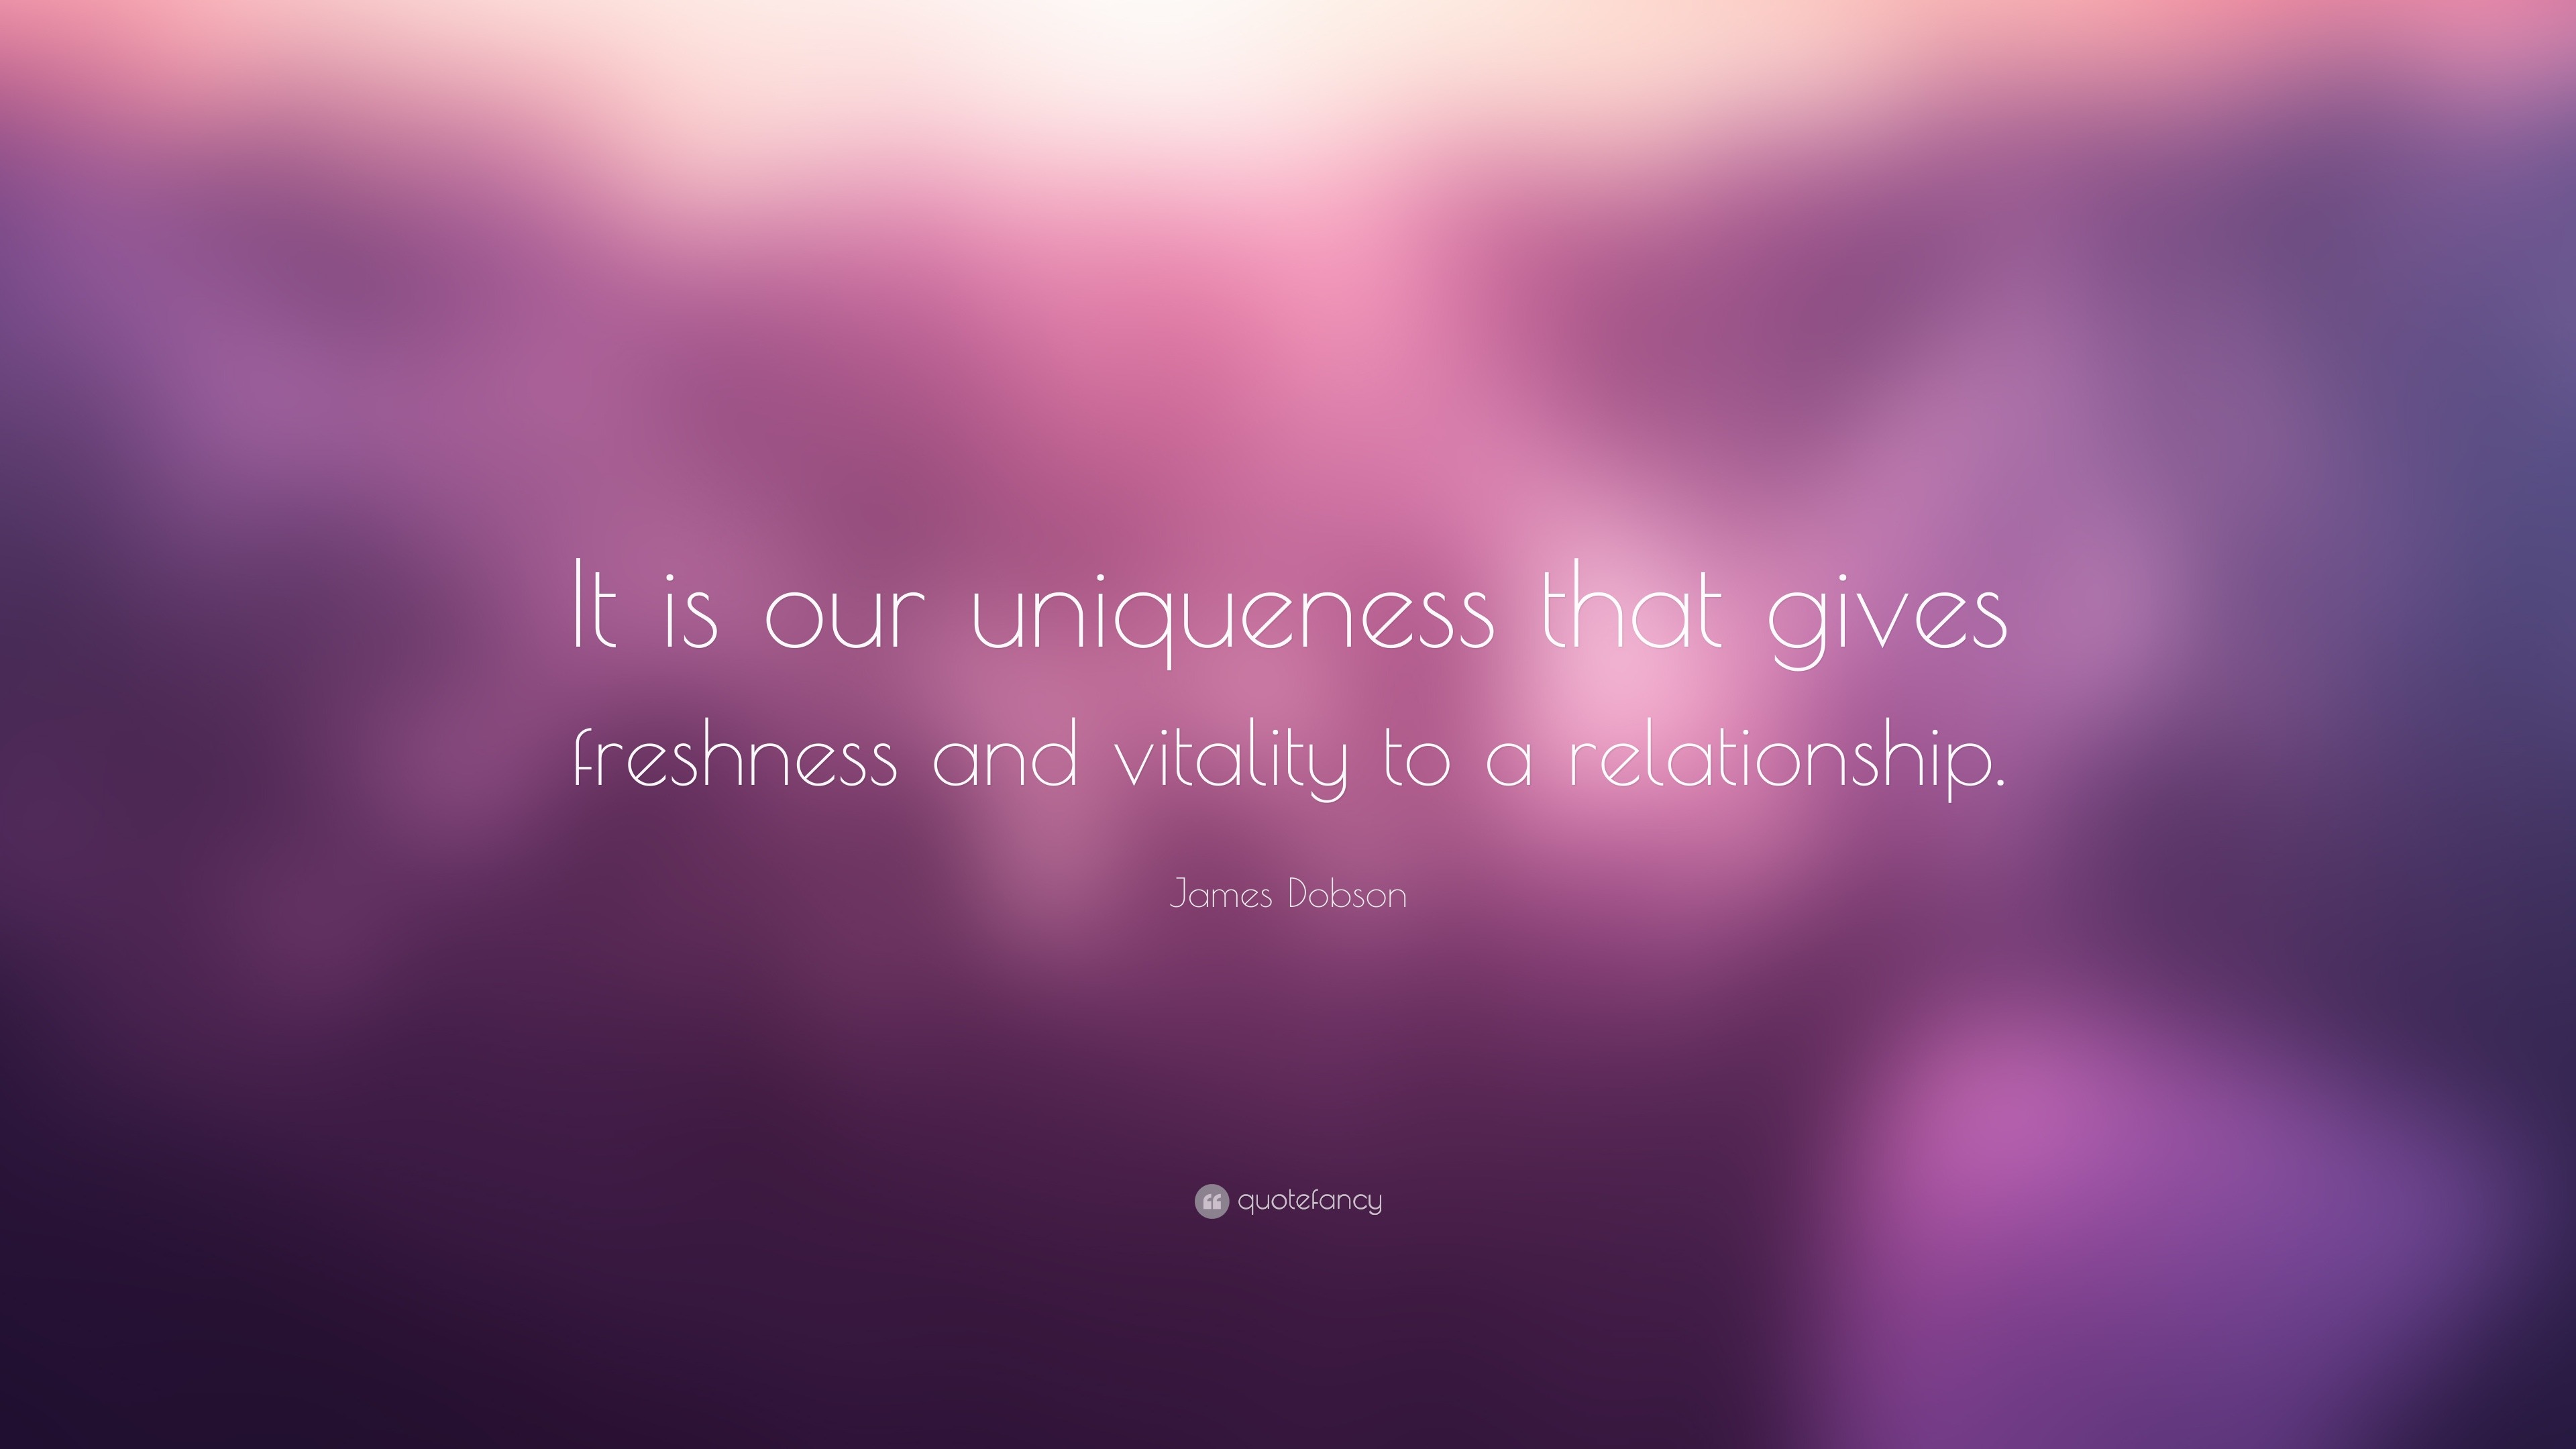 James Dobson Quote: “It is our uniqueness that gives freshness and ...